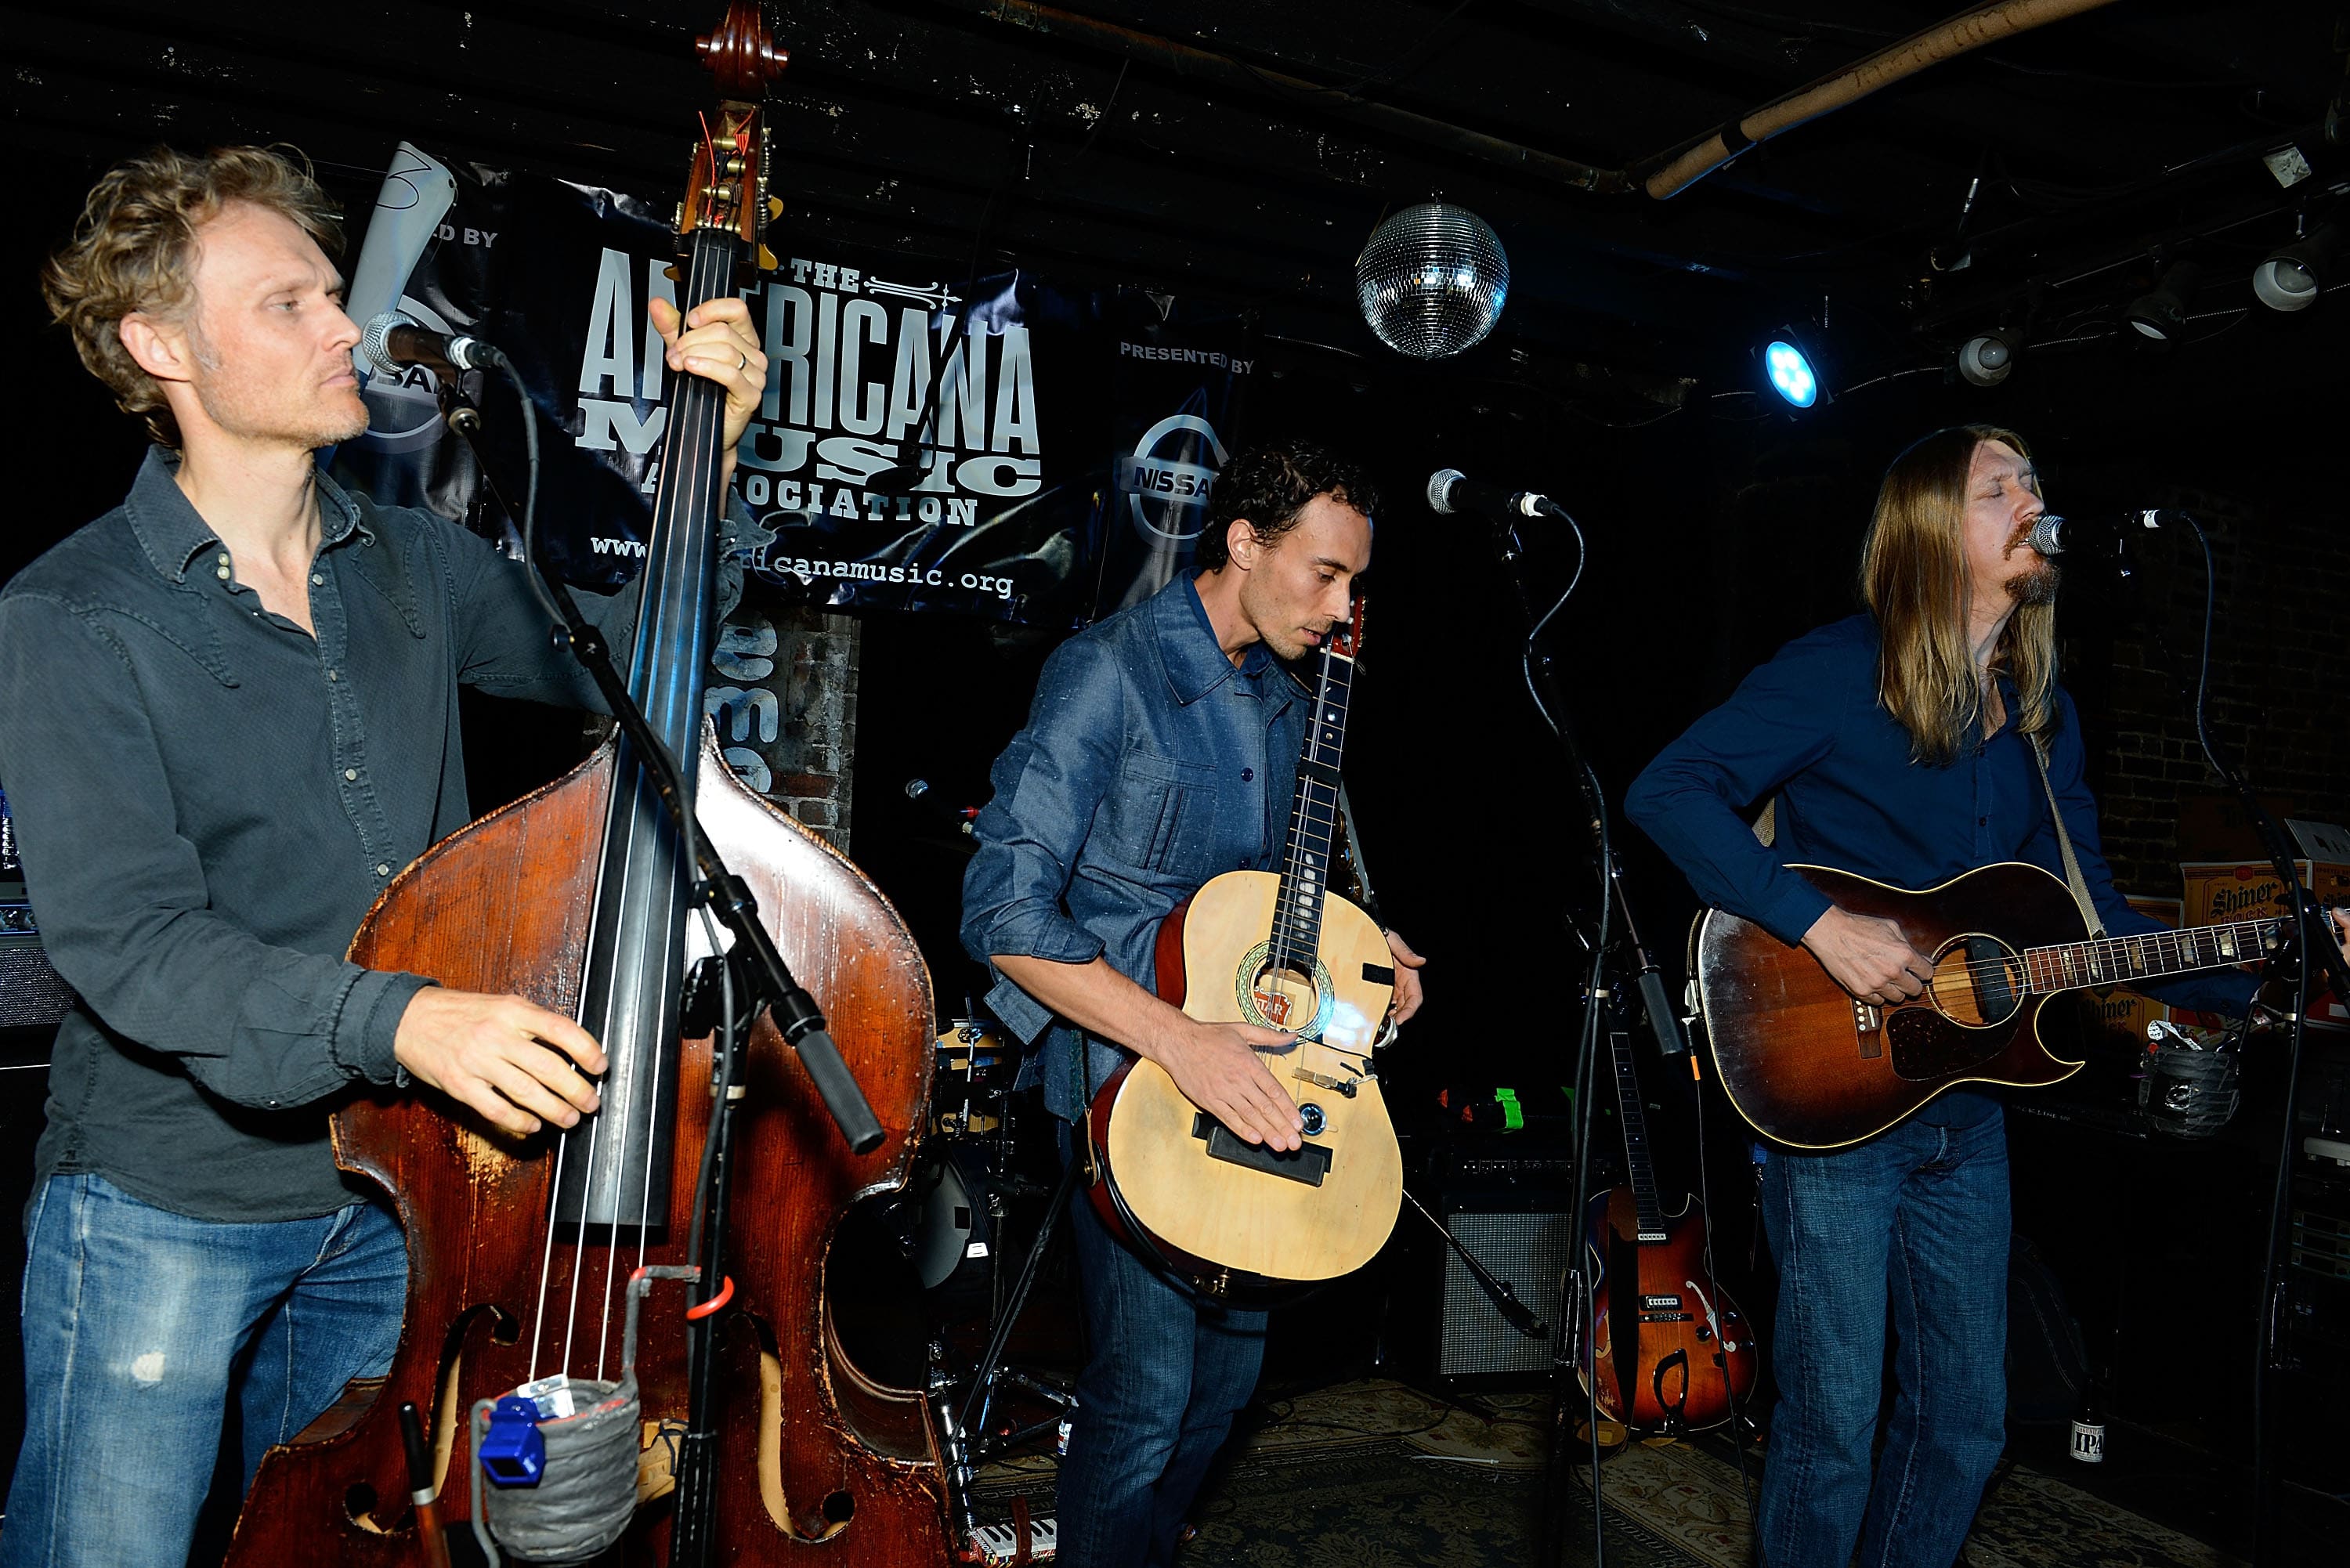 AmericanaFest 2015 Finds The Groove